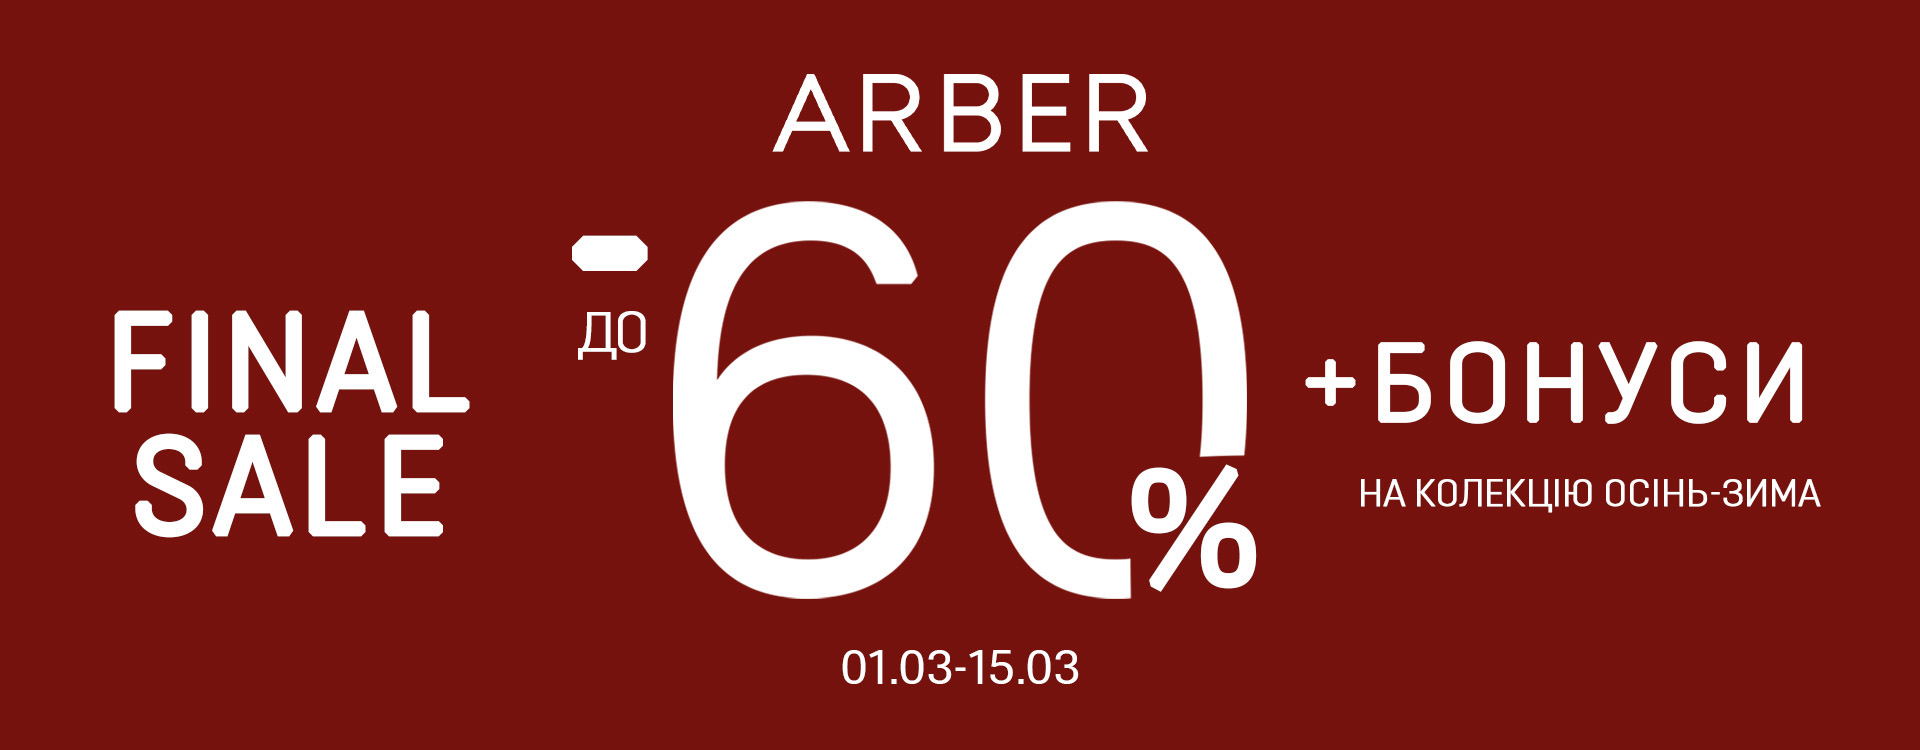 Final SALE in ARBER up to -60%